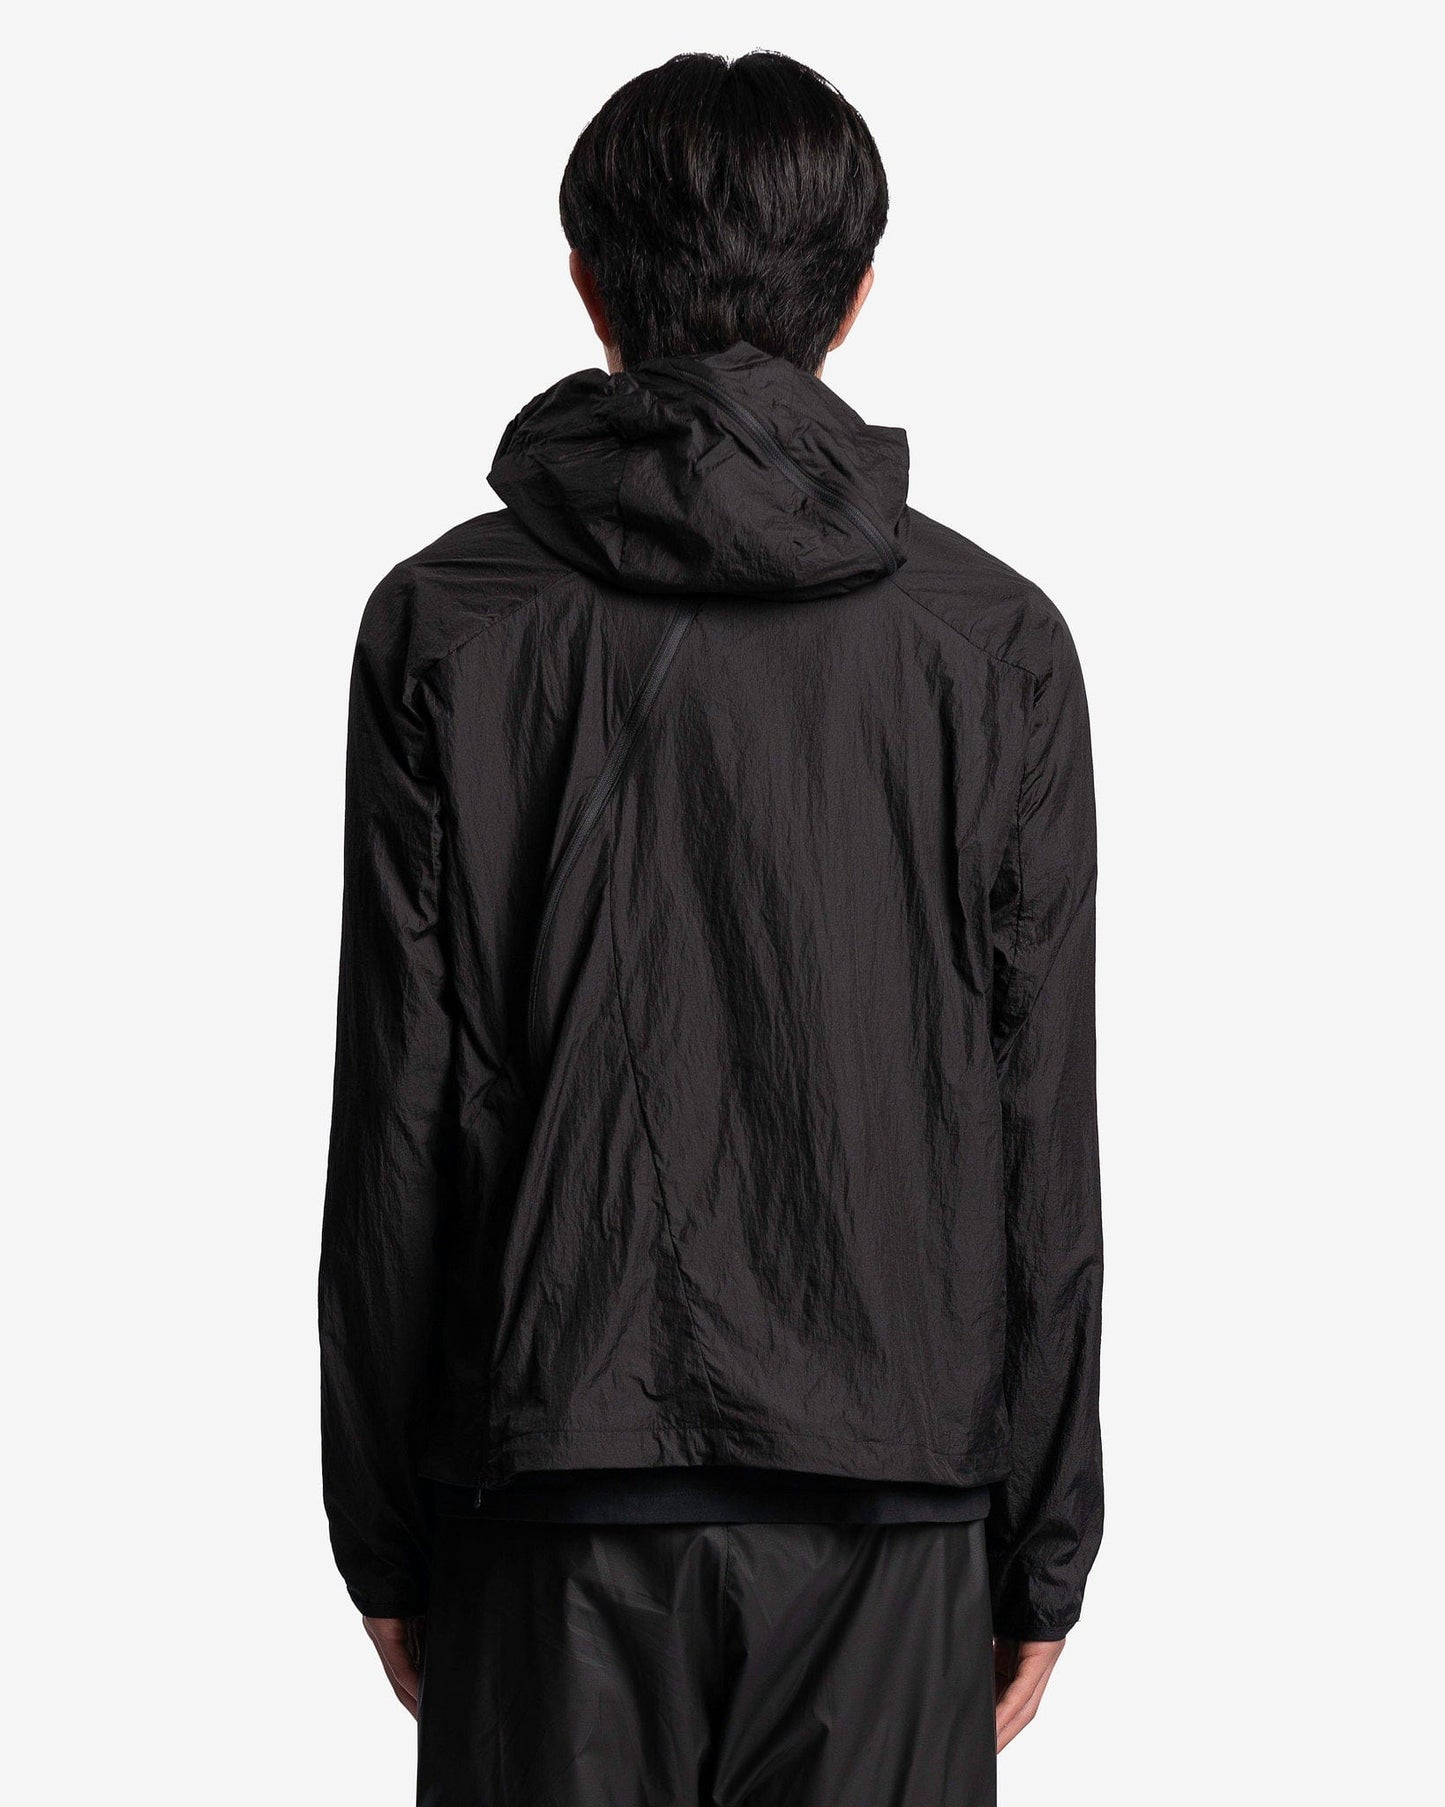 POST ARCHIVE FACTION (P.A.F) Men's Jackets 5.0+ Technical Jacket Center in Black